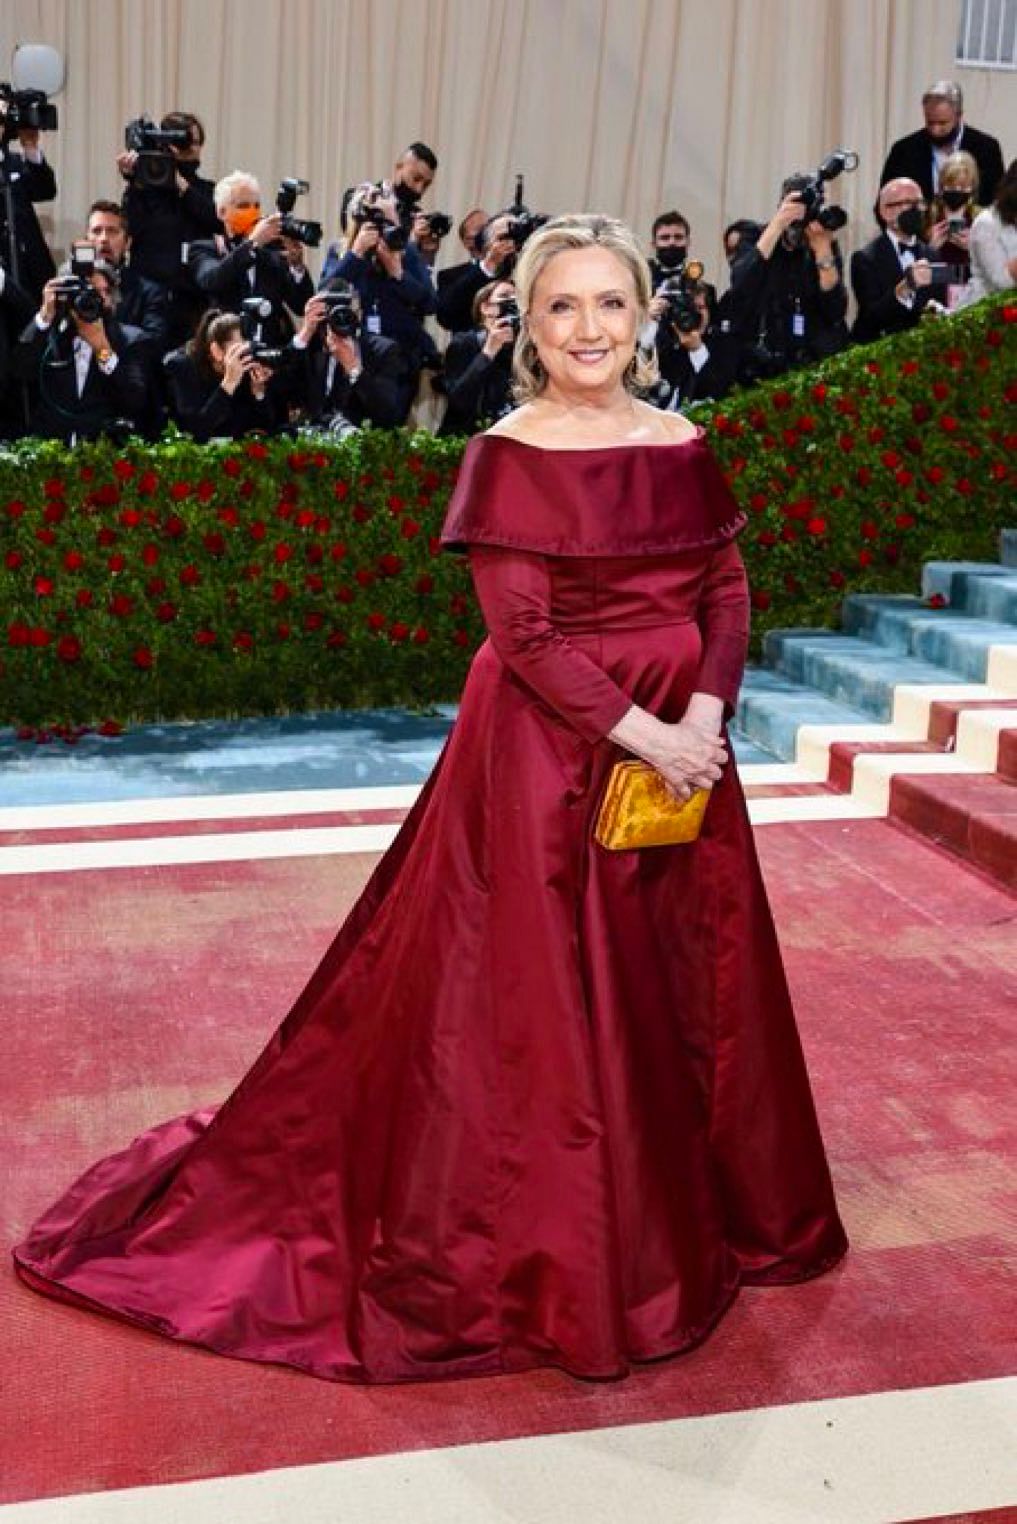 Sarah Jessica Parker's Met Gala 2022 outfit was a homage to Elizabeth Hobbs Keckley.